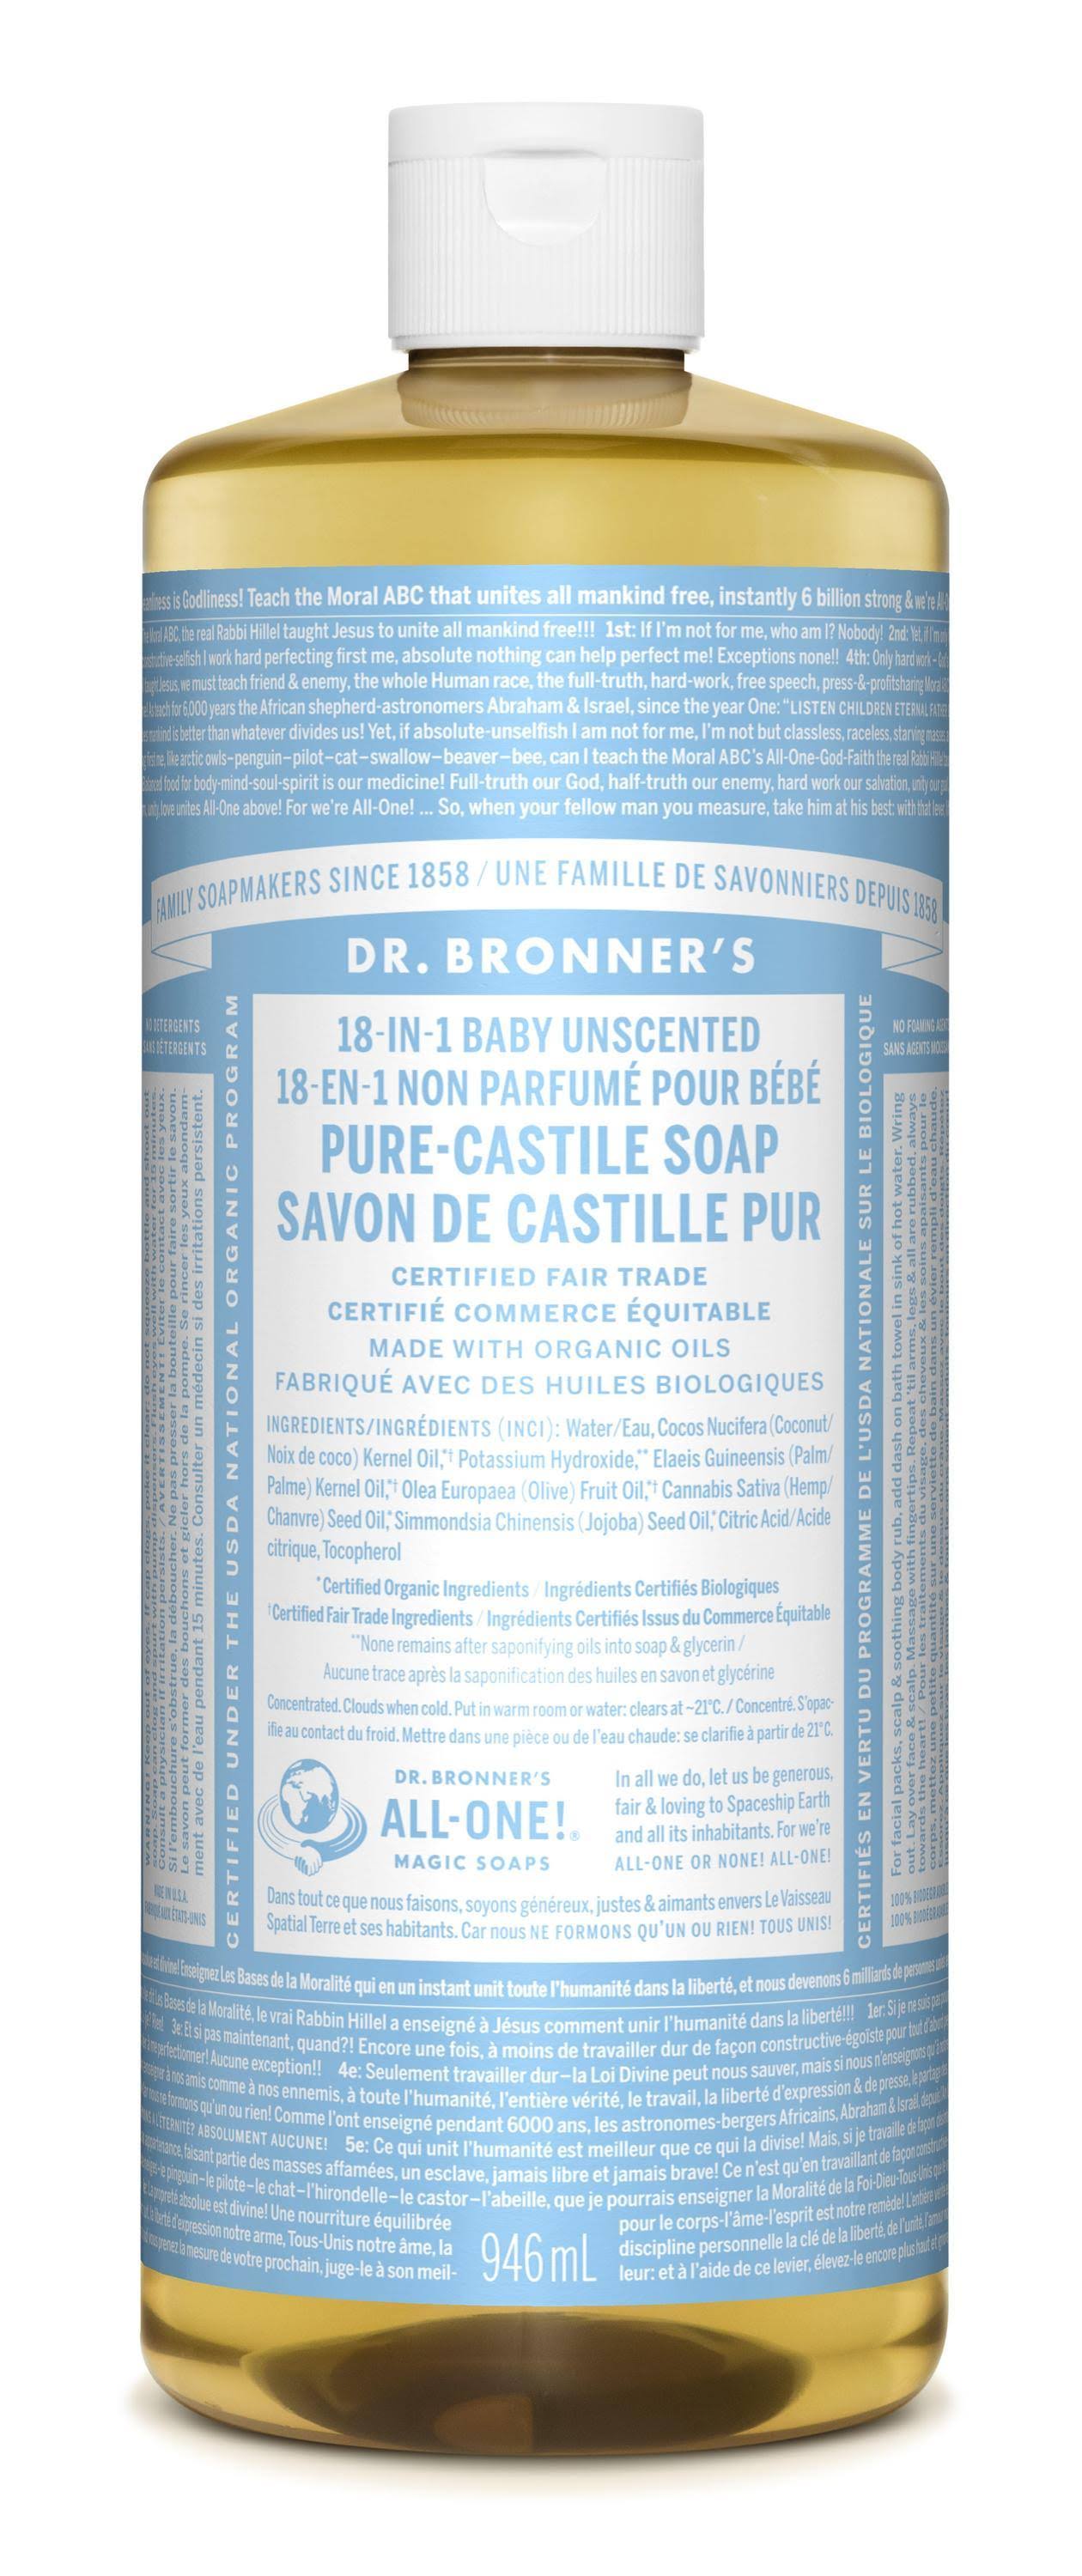 Dr. Bronner's Baby Mild Classic Pure-Castile Soap - Unscented